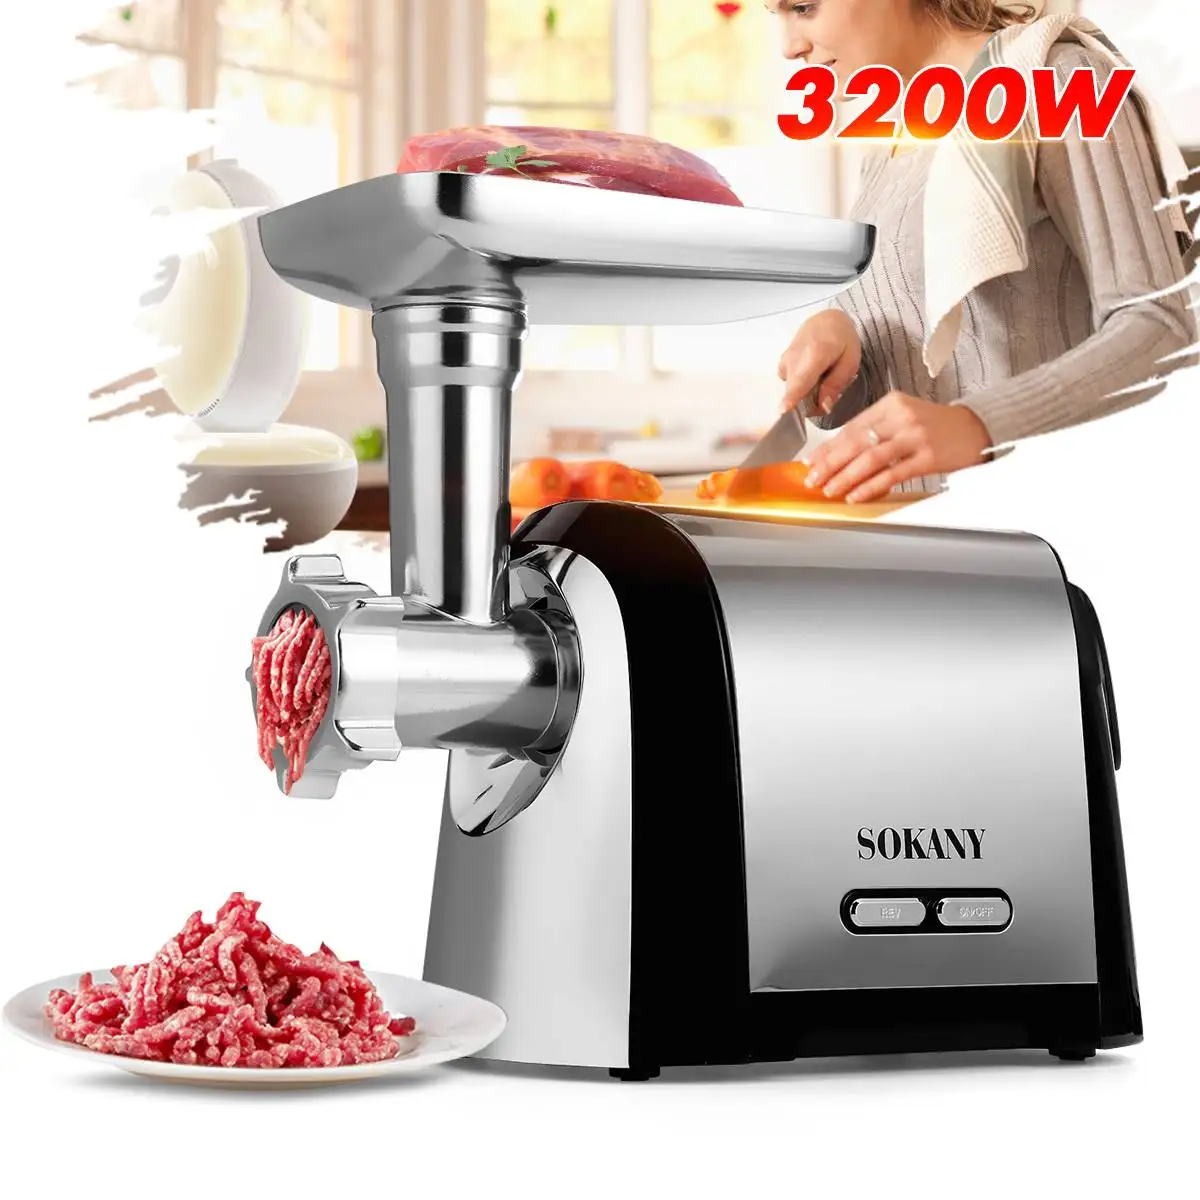 3200W Electric Meat Grinders Stainless Steel Powerful Electric Grinder Sausage Stuffer Meat Mincer Home Kitchen Food Processor